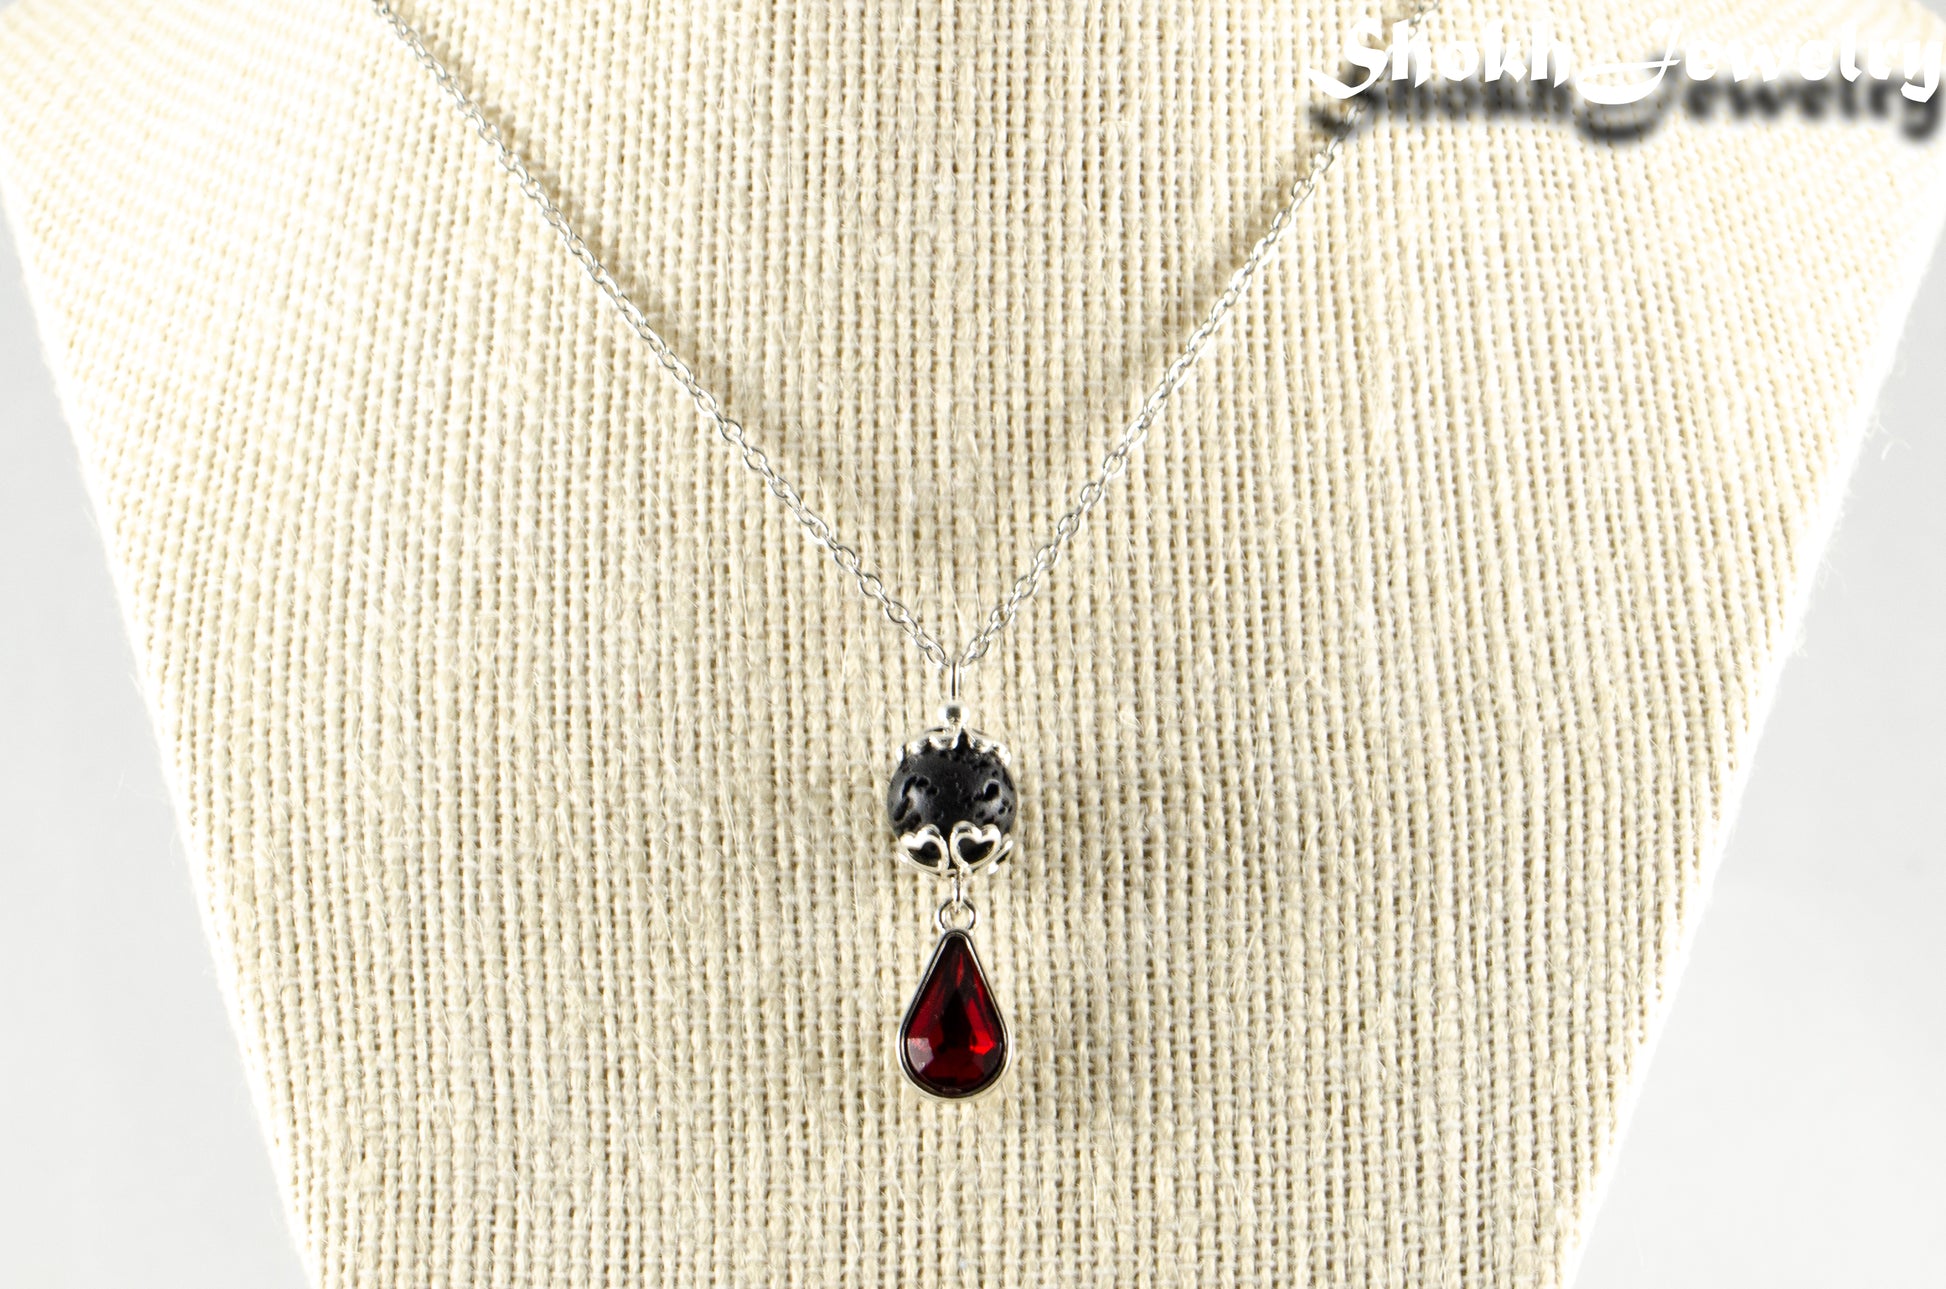 Lava Rock and Teardrop January Birthstone Choker Necklace displayed on a bust.